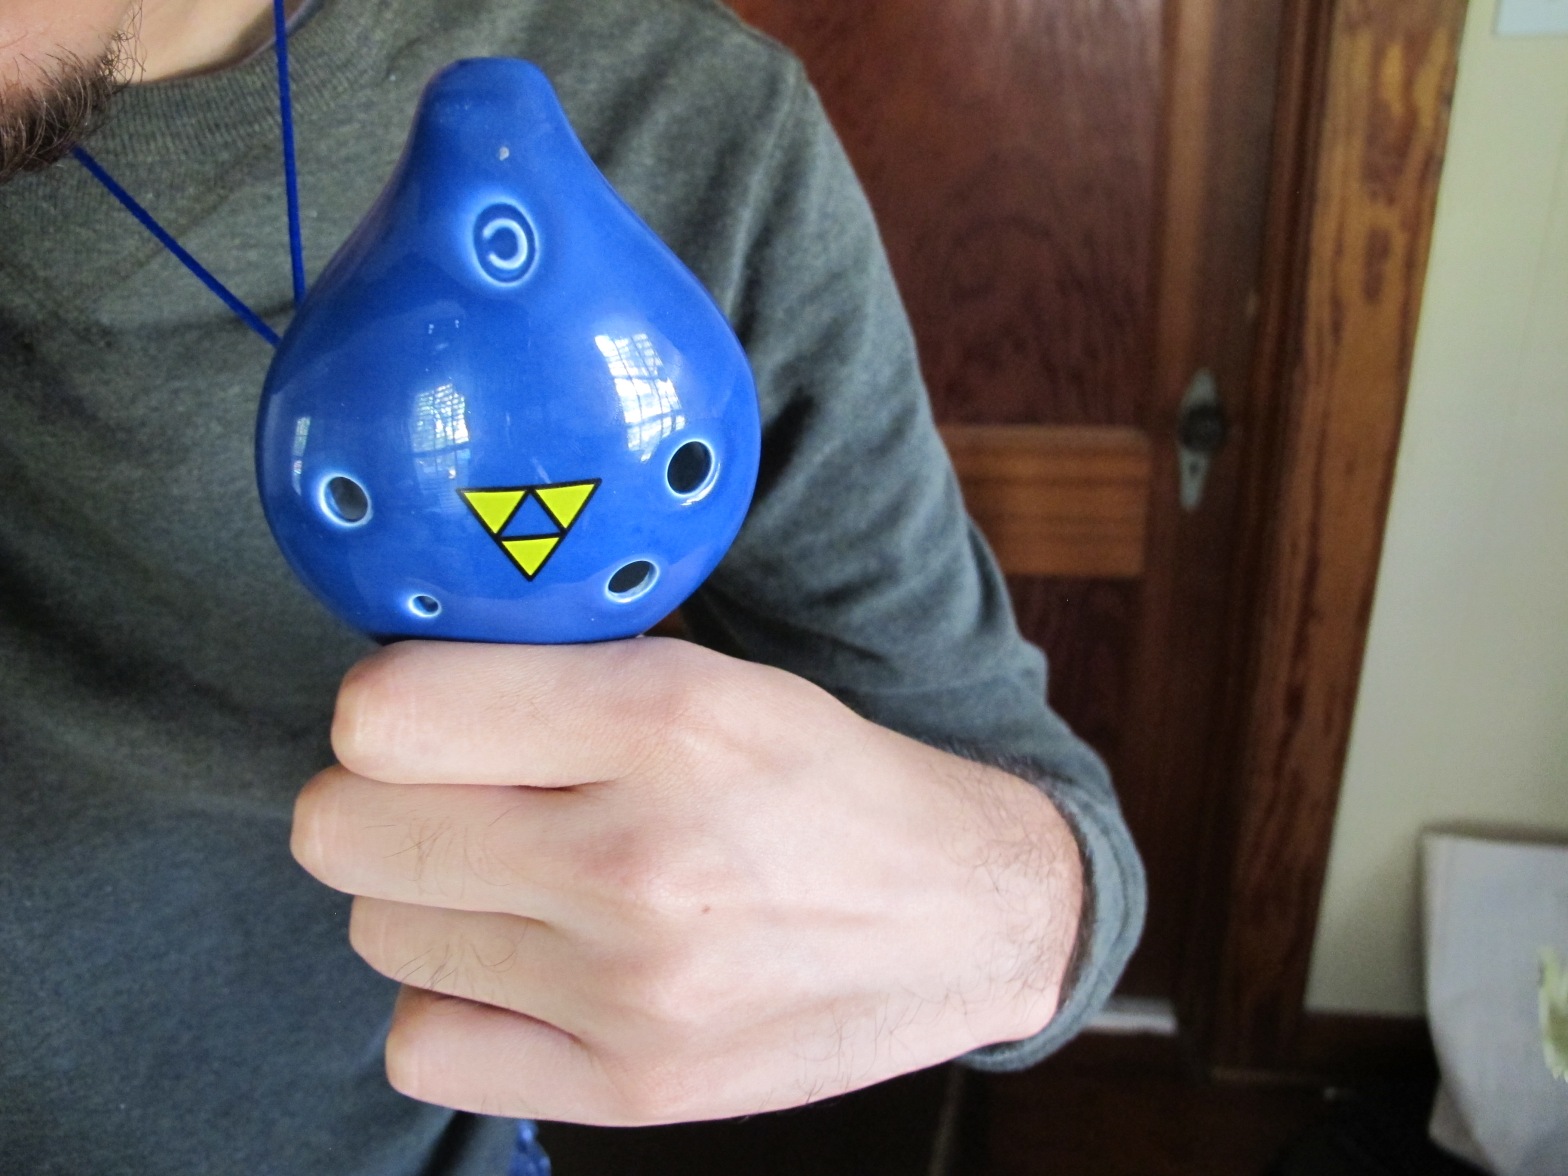  How to Play Ocarina in Easy Way: Learn How to Play